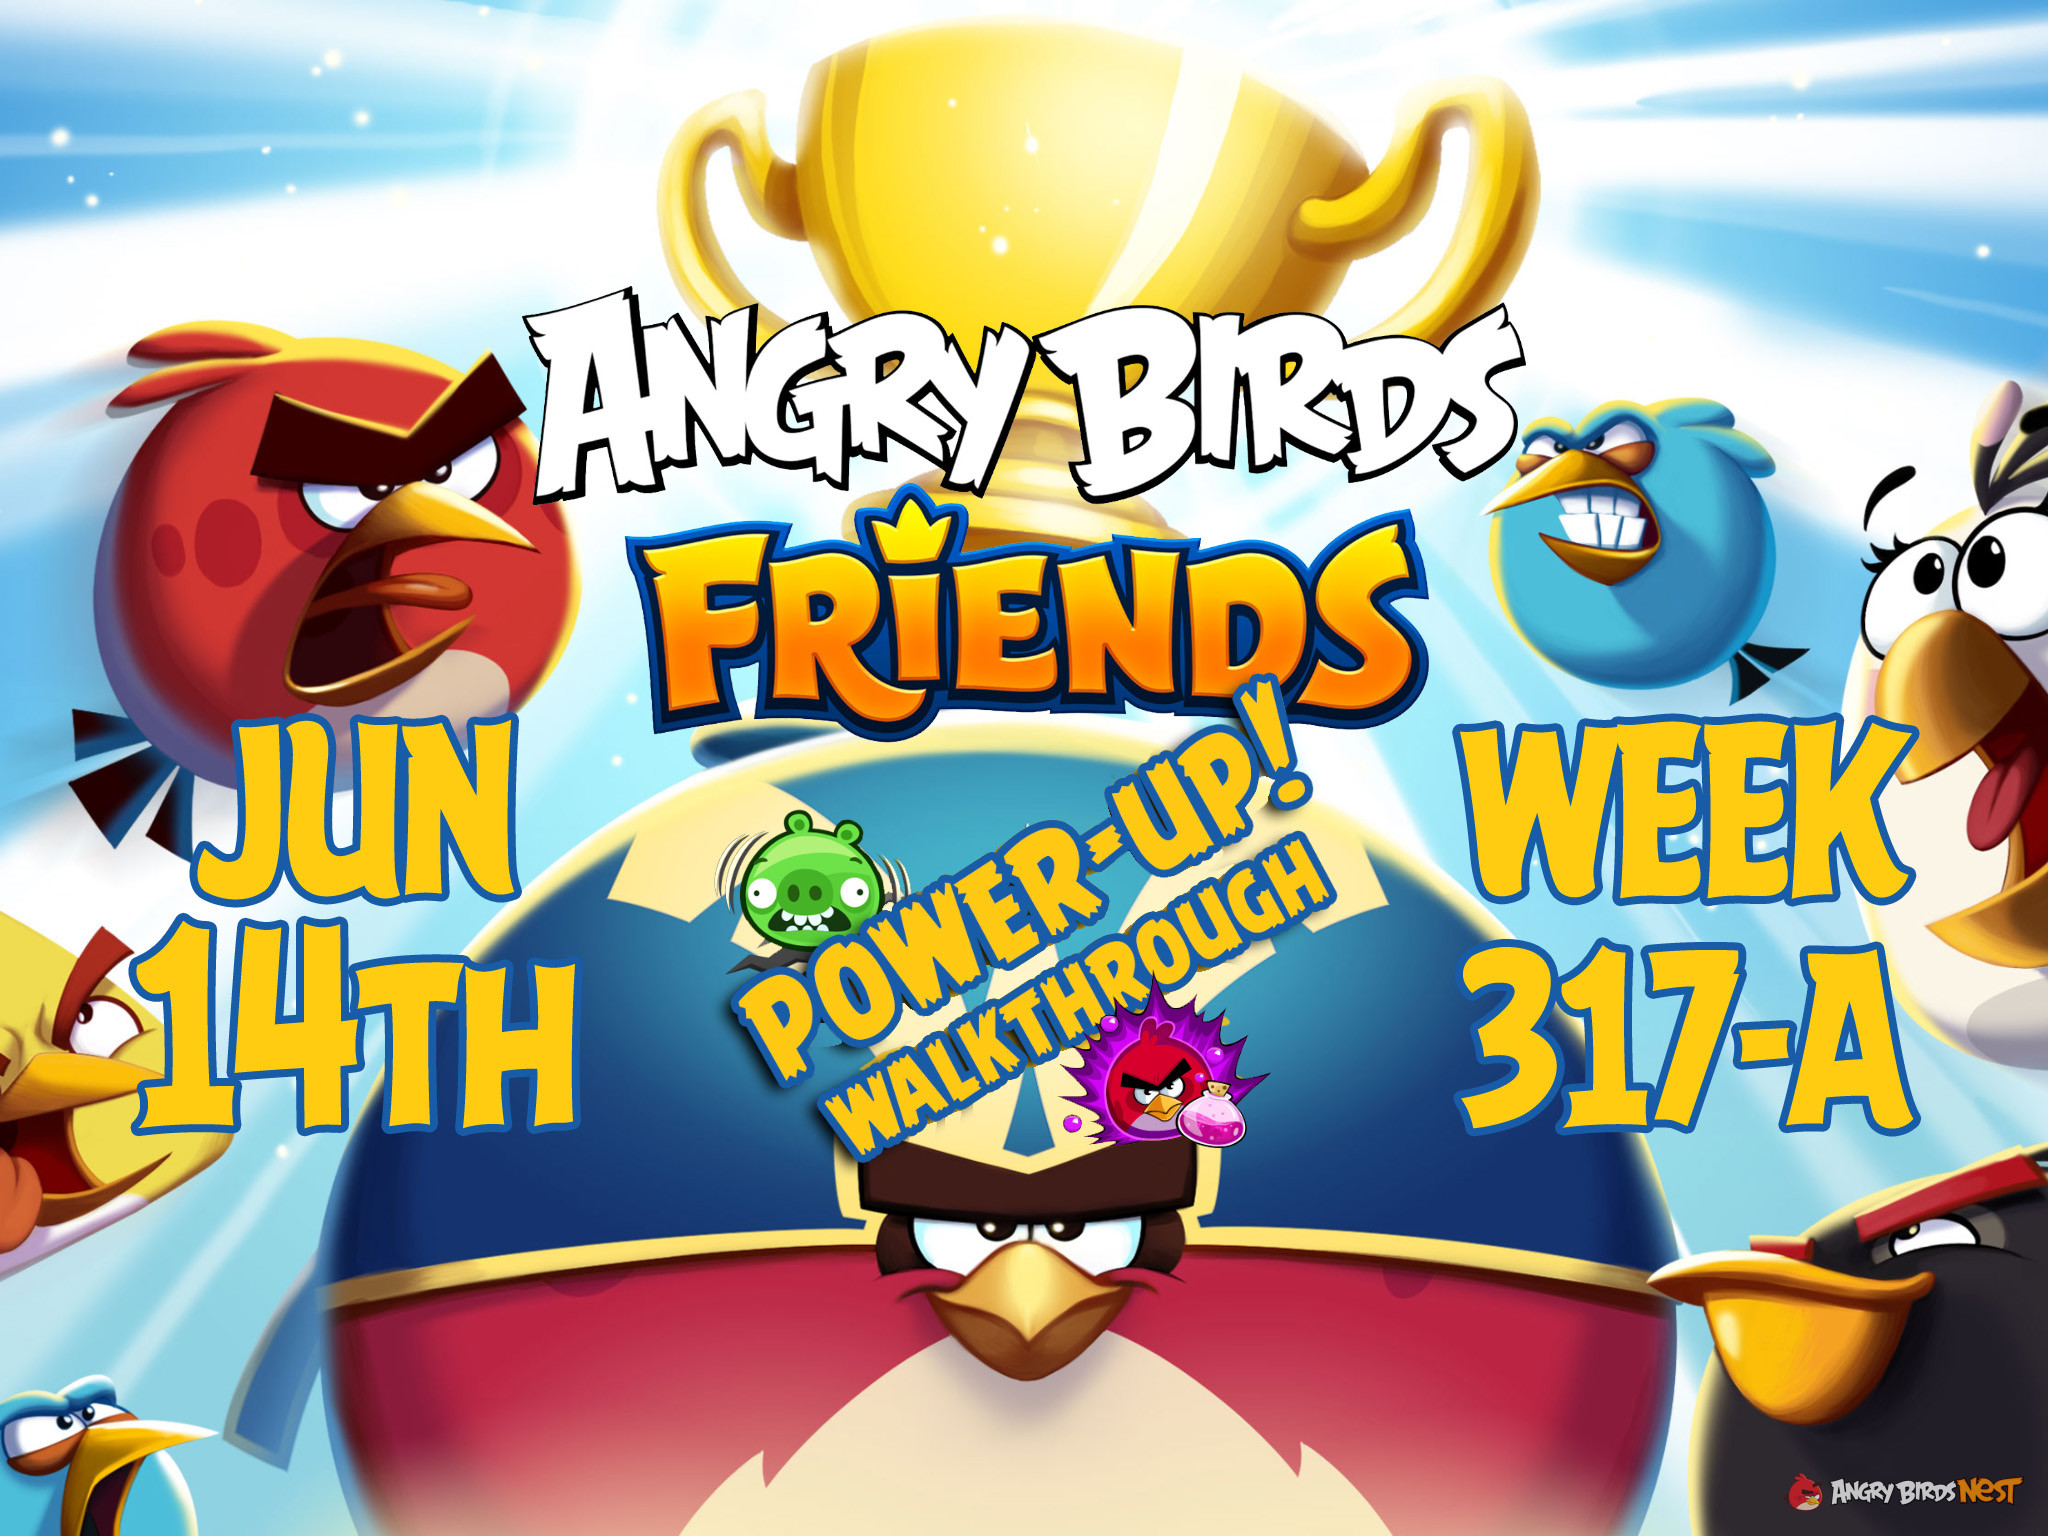 Angry-Birds-Friends-Tournament-Week-317-A-Feature-Image-PU